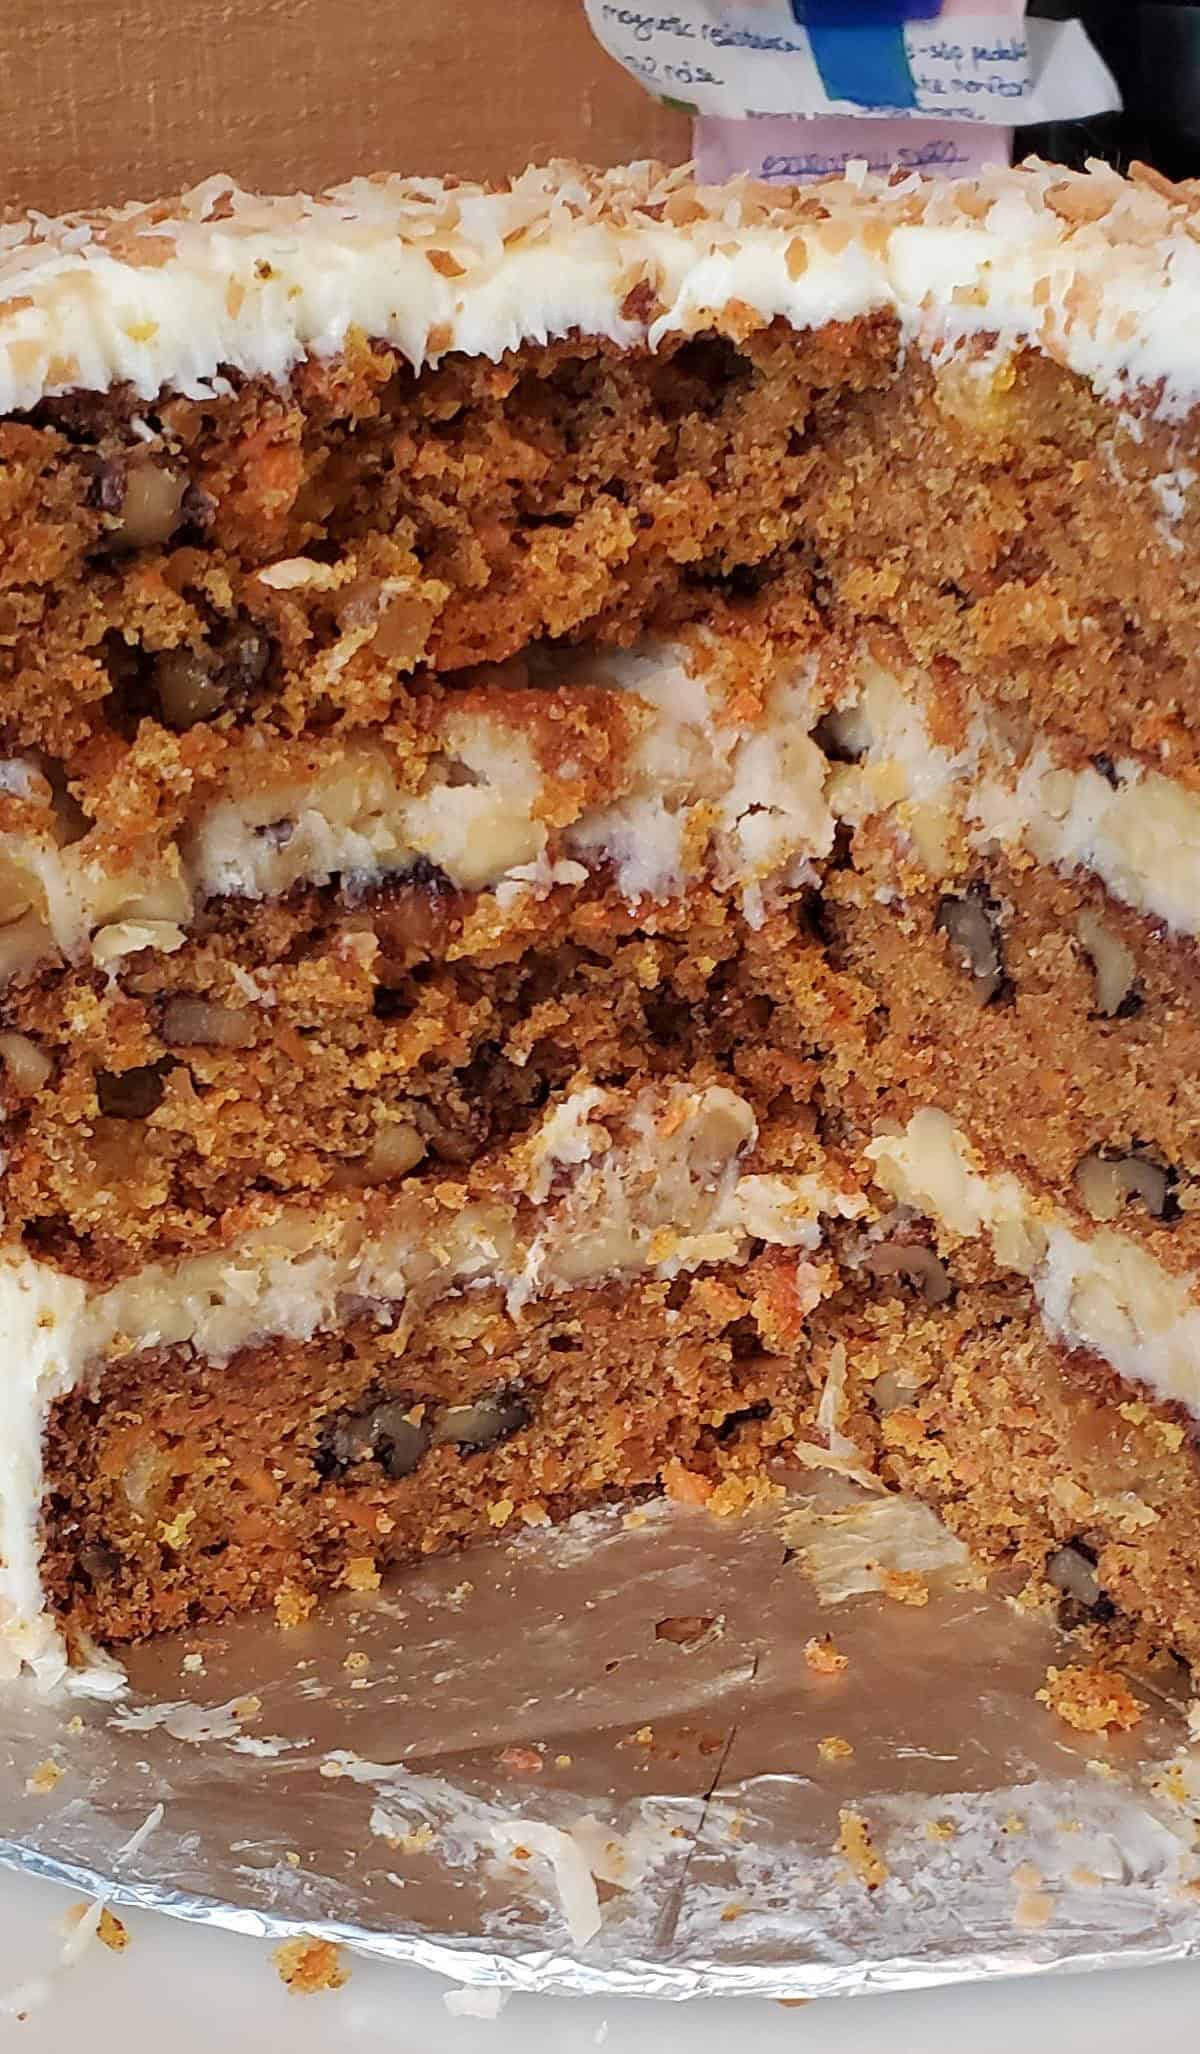  The moistness of this cake is divine; you won't need a glass of milk to enjoy it.